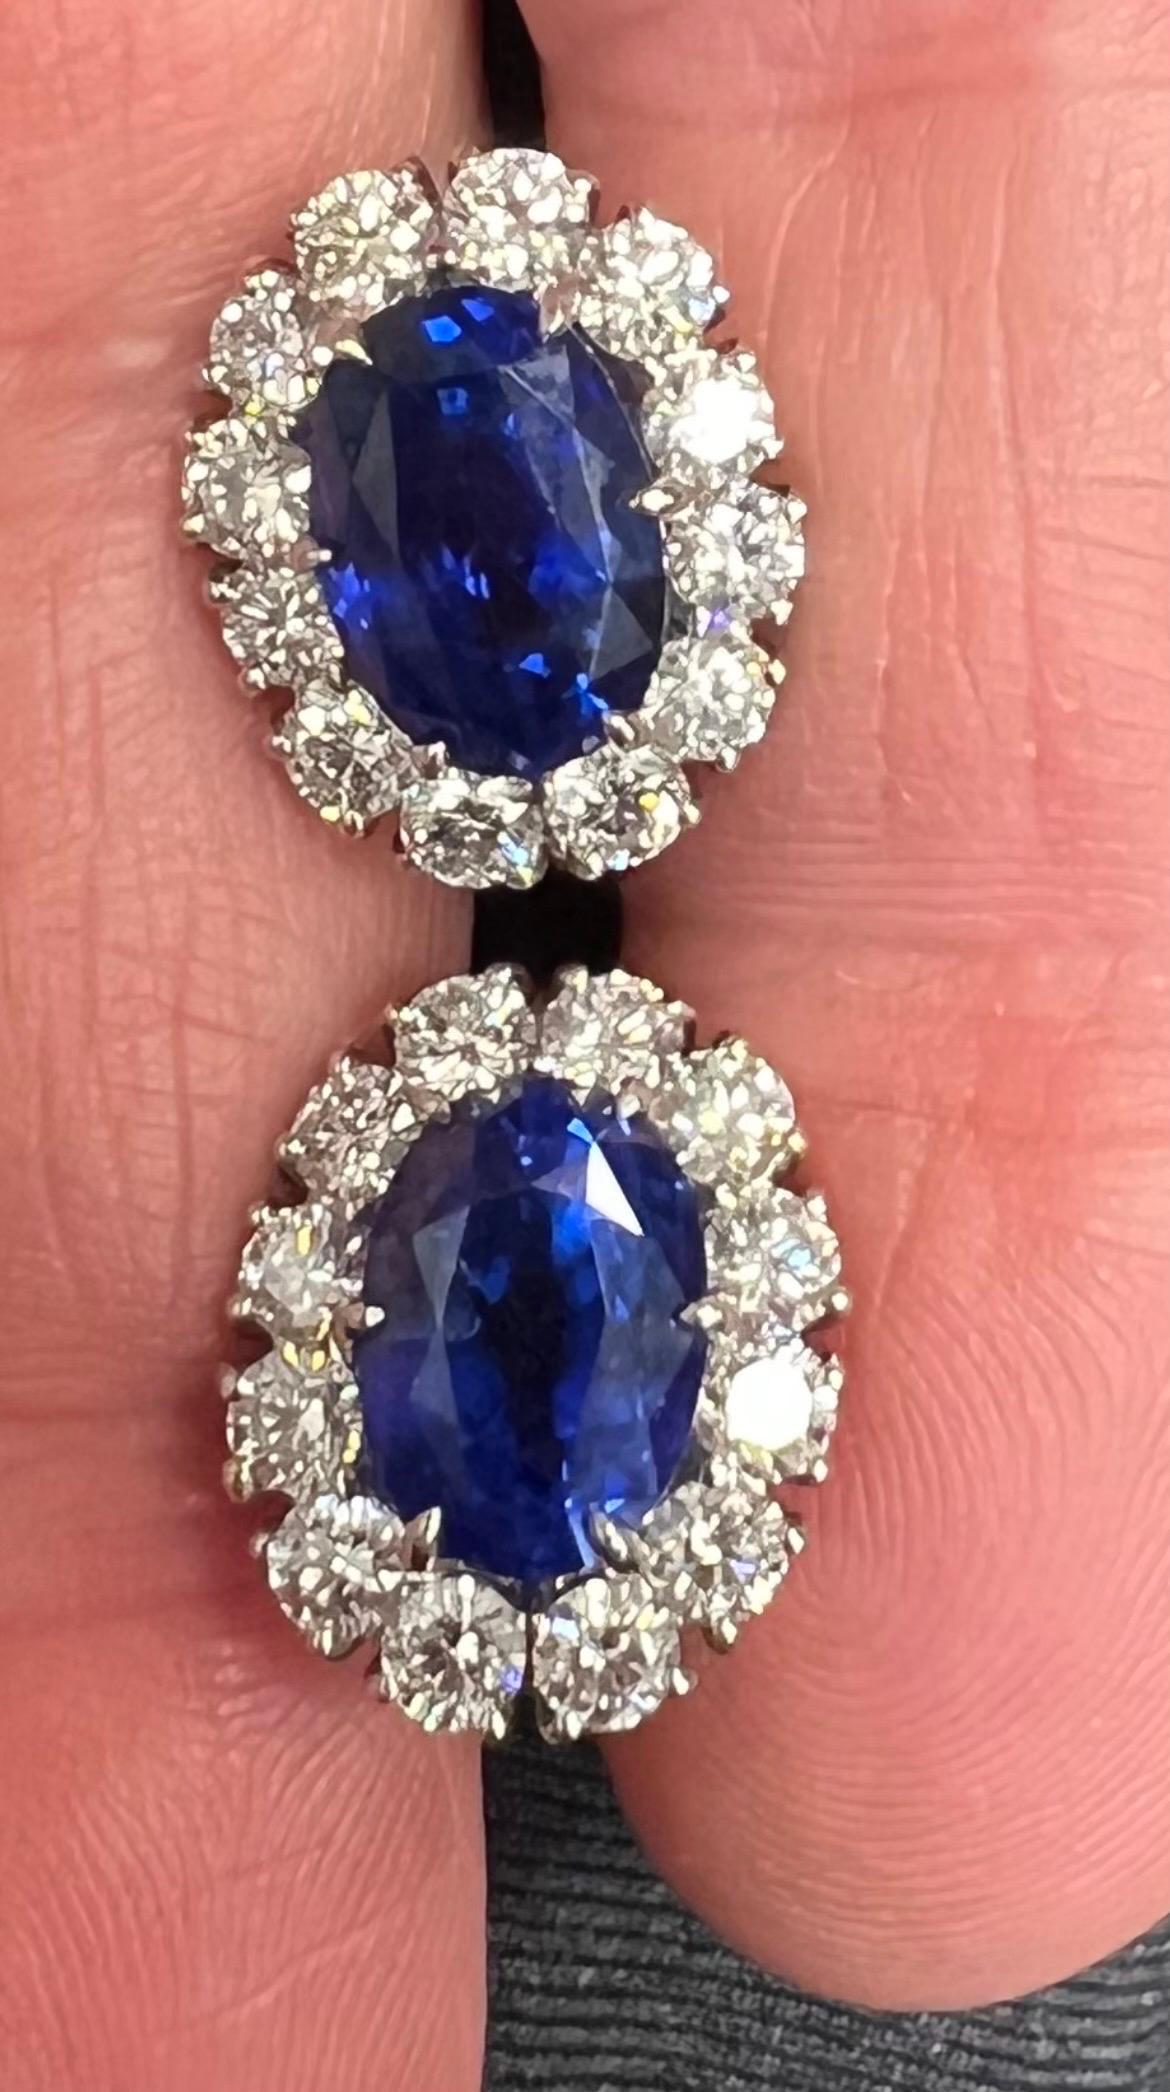 Stunning pair of GIA certified natural unheated Burma Sapphires. 

These amazing ear clips are set with aprox 10 carats of Certified Natural Sapphires. Awarded by the Gemological Institute of America (GIA) with the coveted grade of ROYAL BLUE for